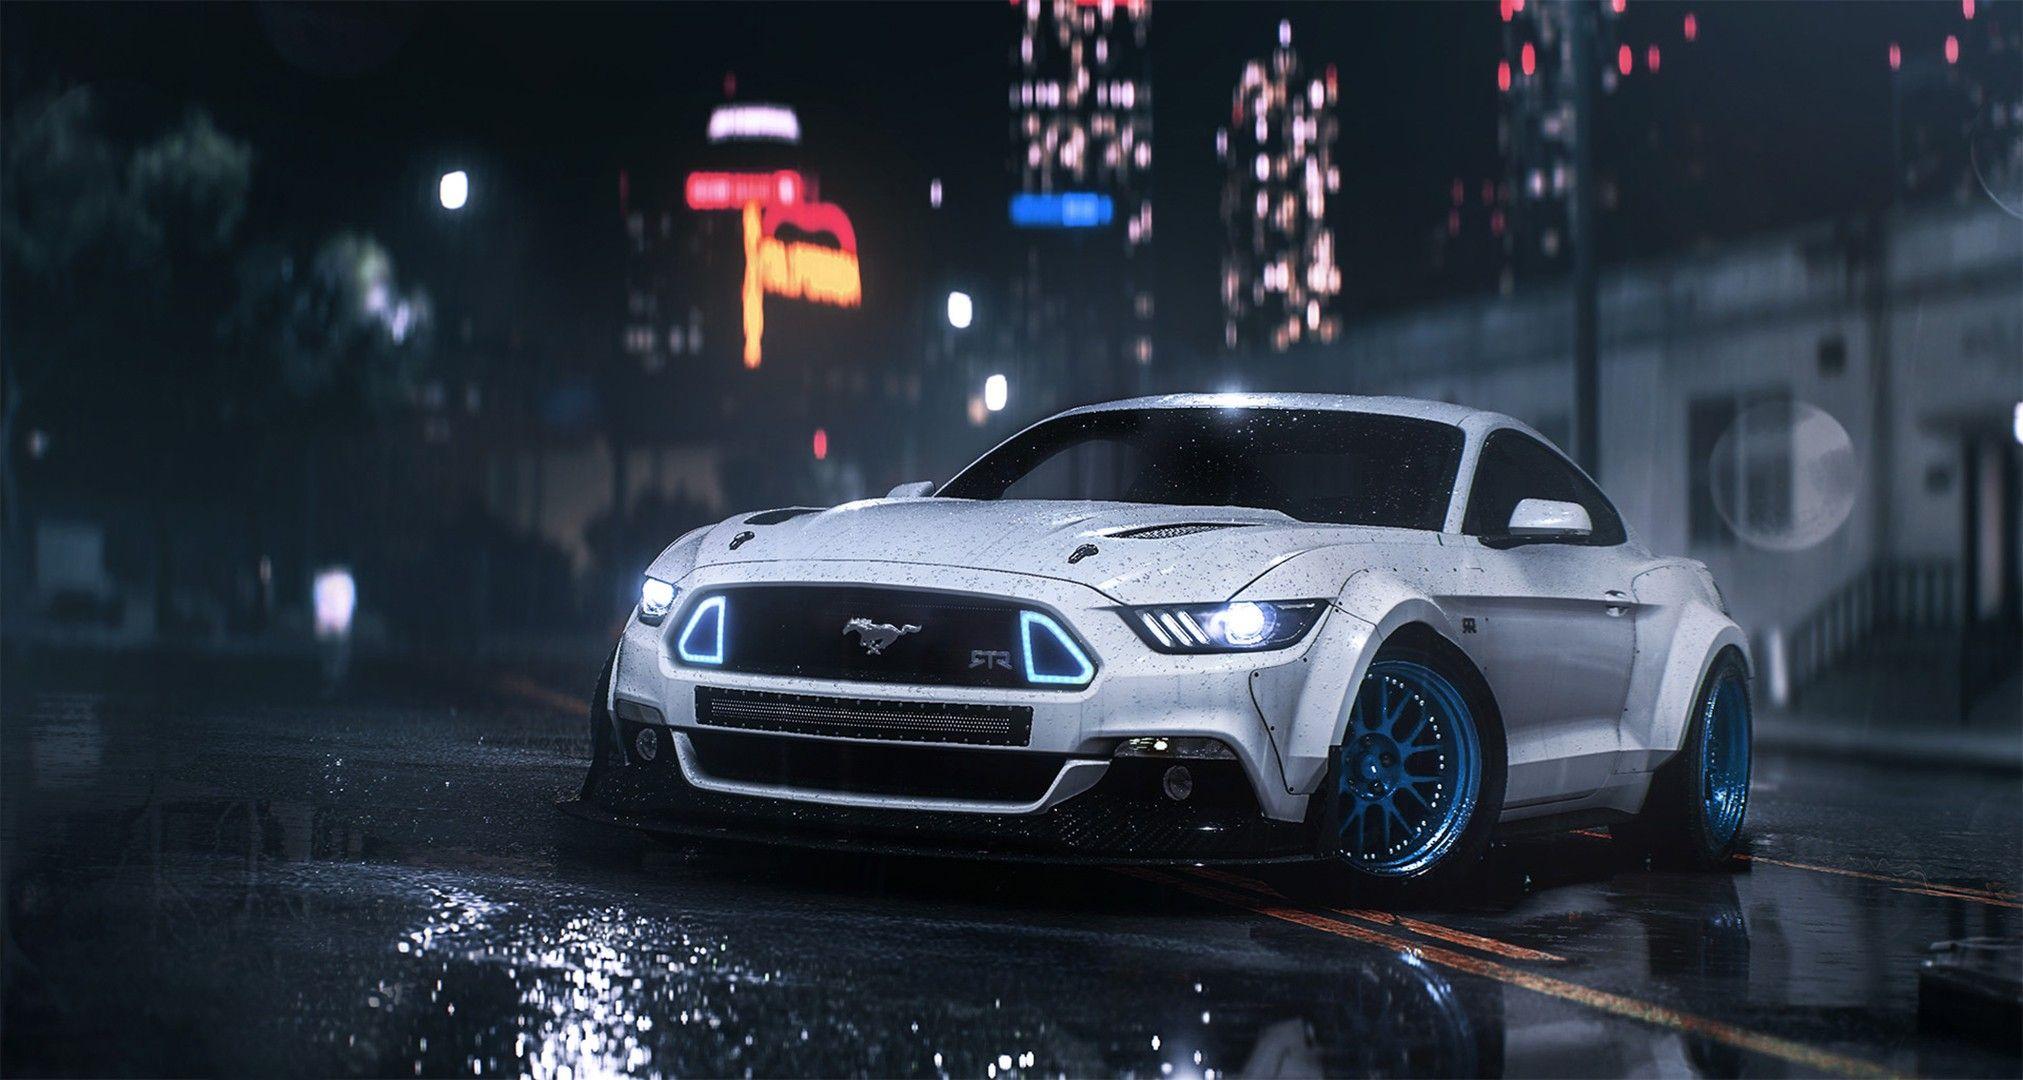 Need For Speed Mustang, HD Cars, 4k Wallpaper, Image, Background